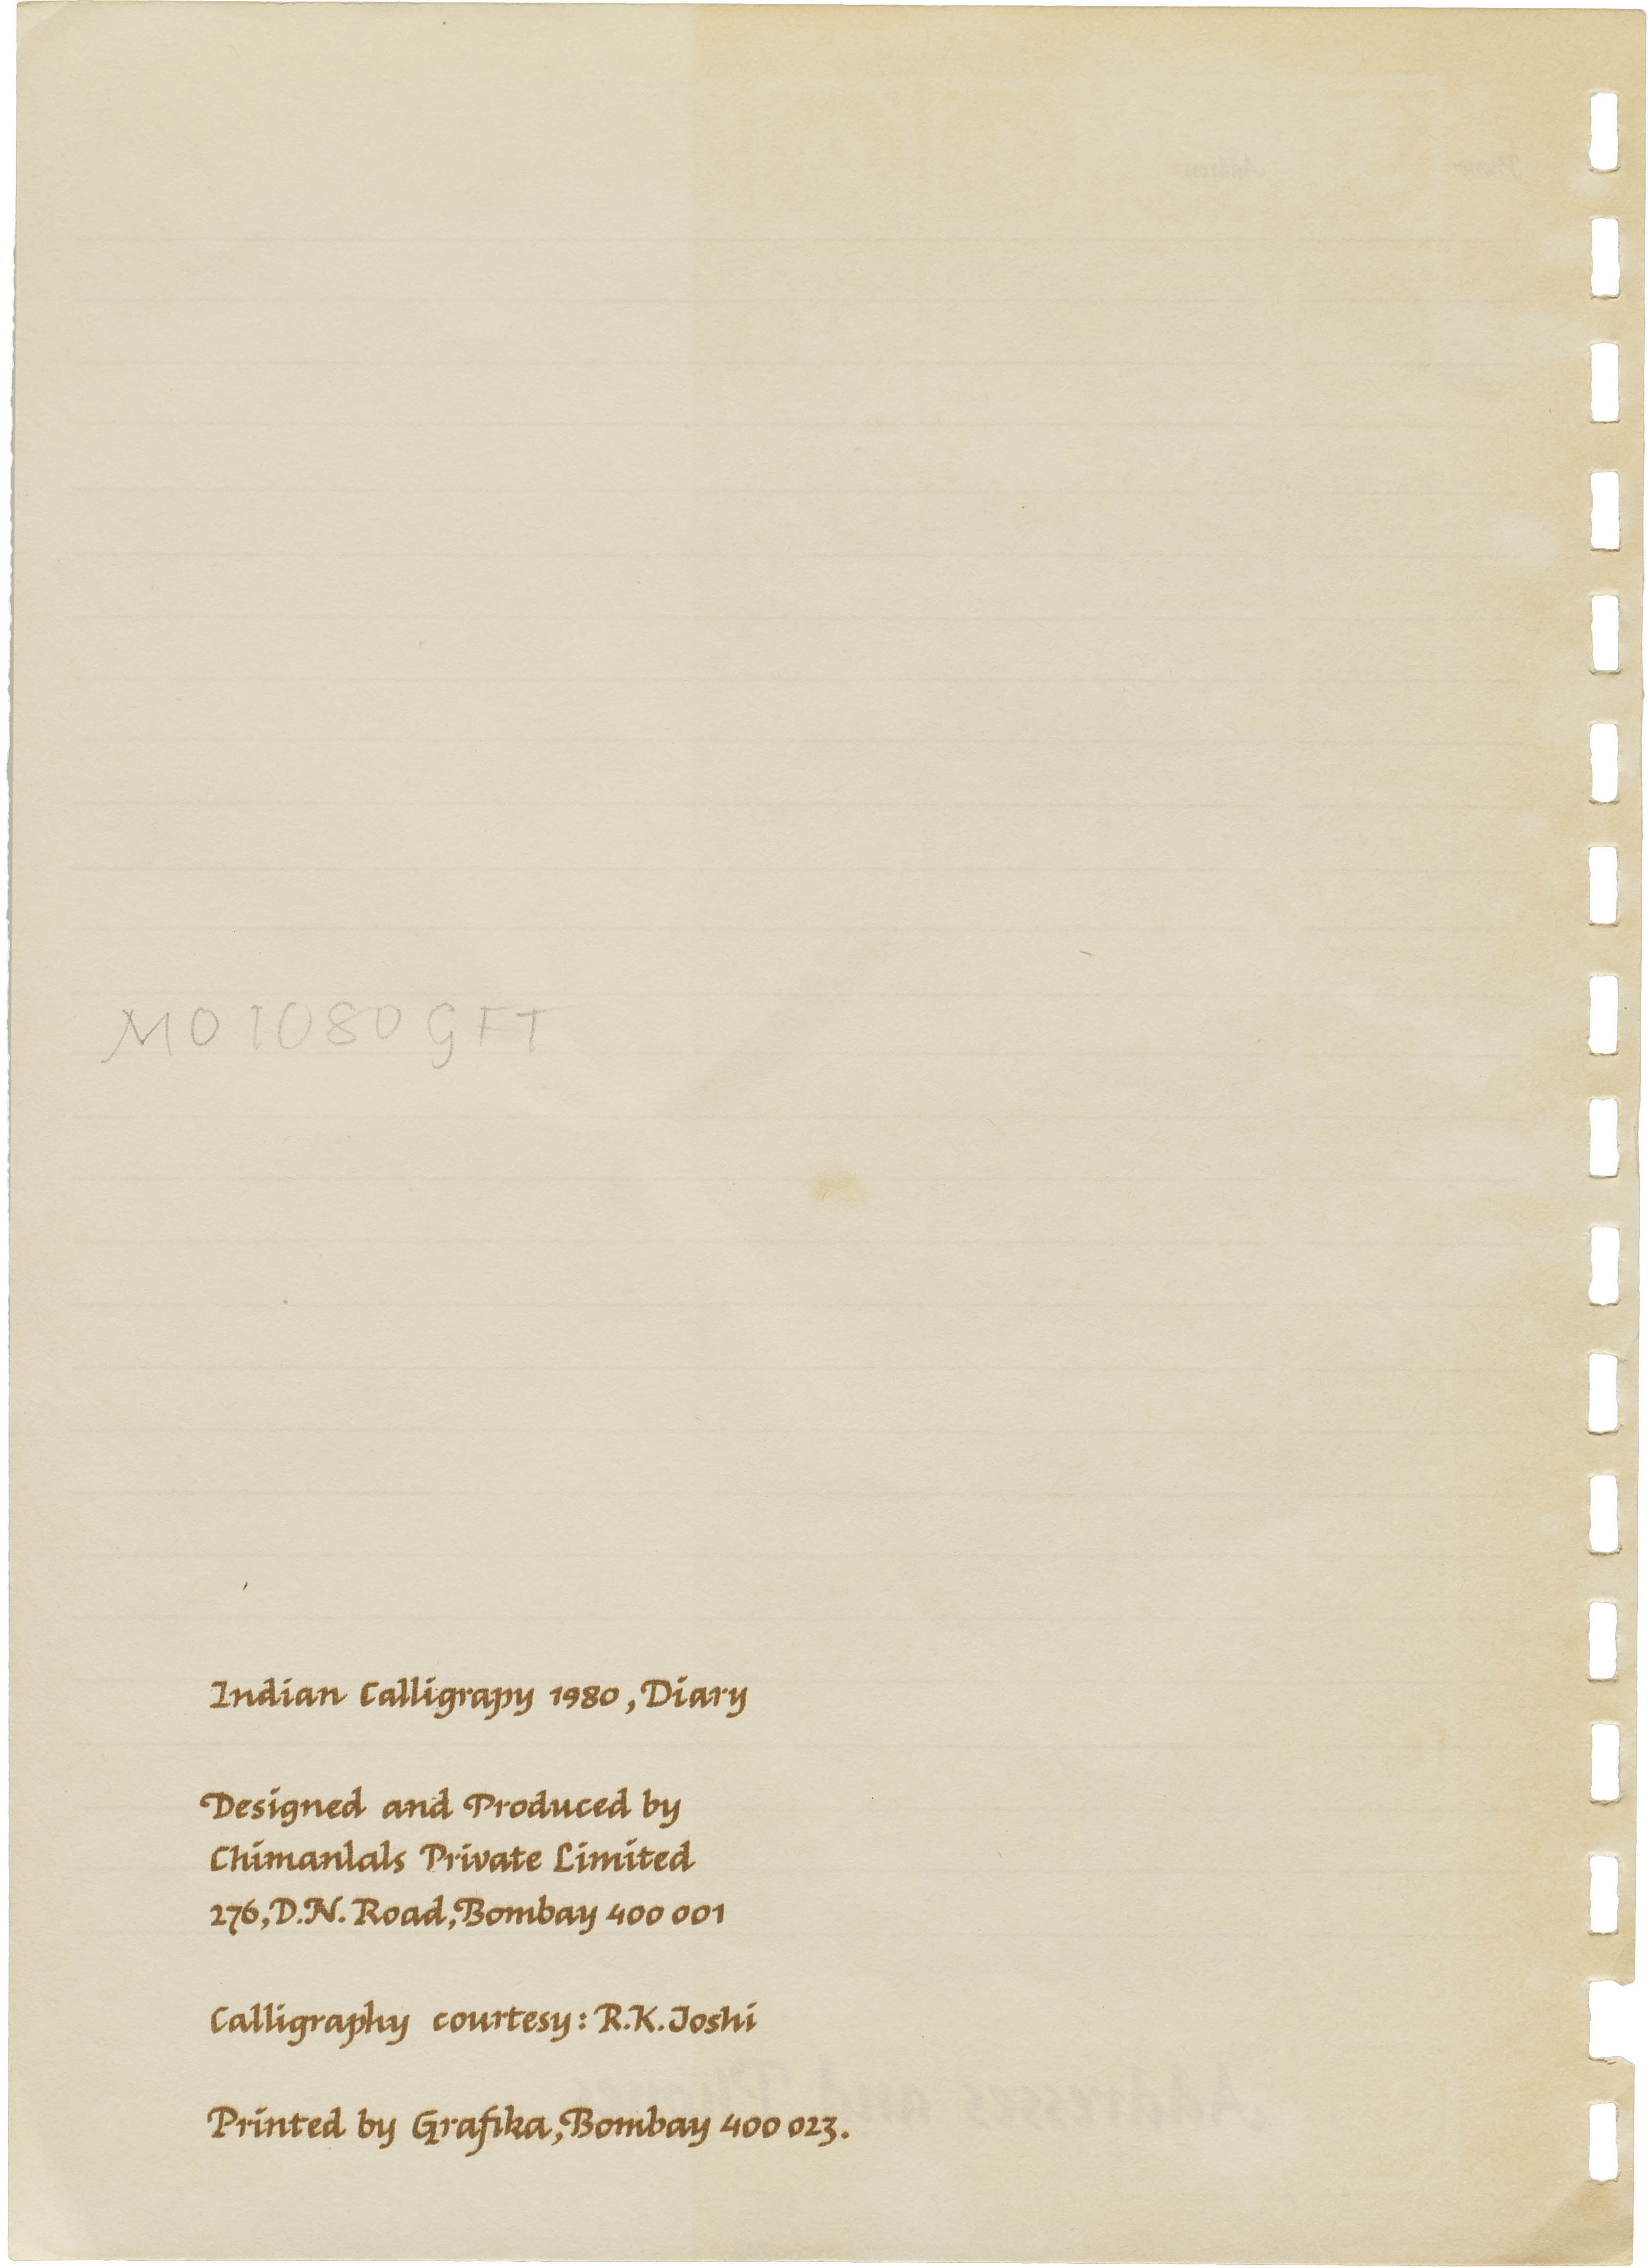 Reverse of the lined page which list credits.